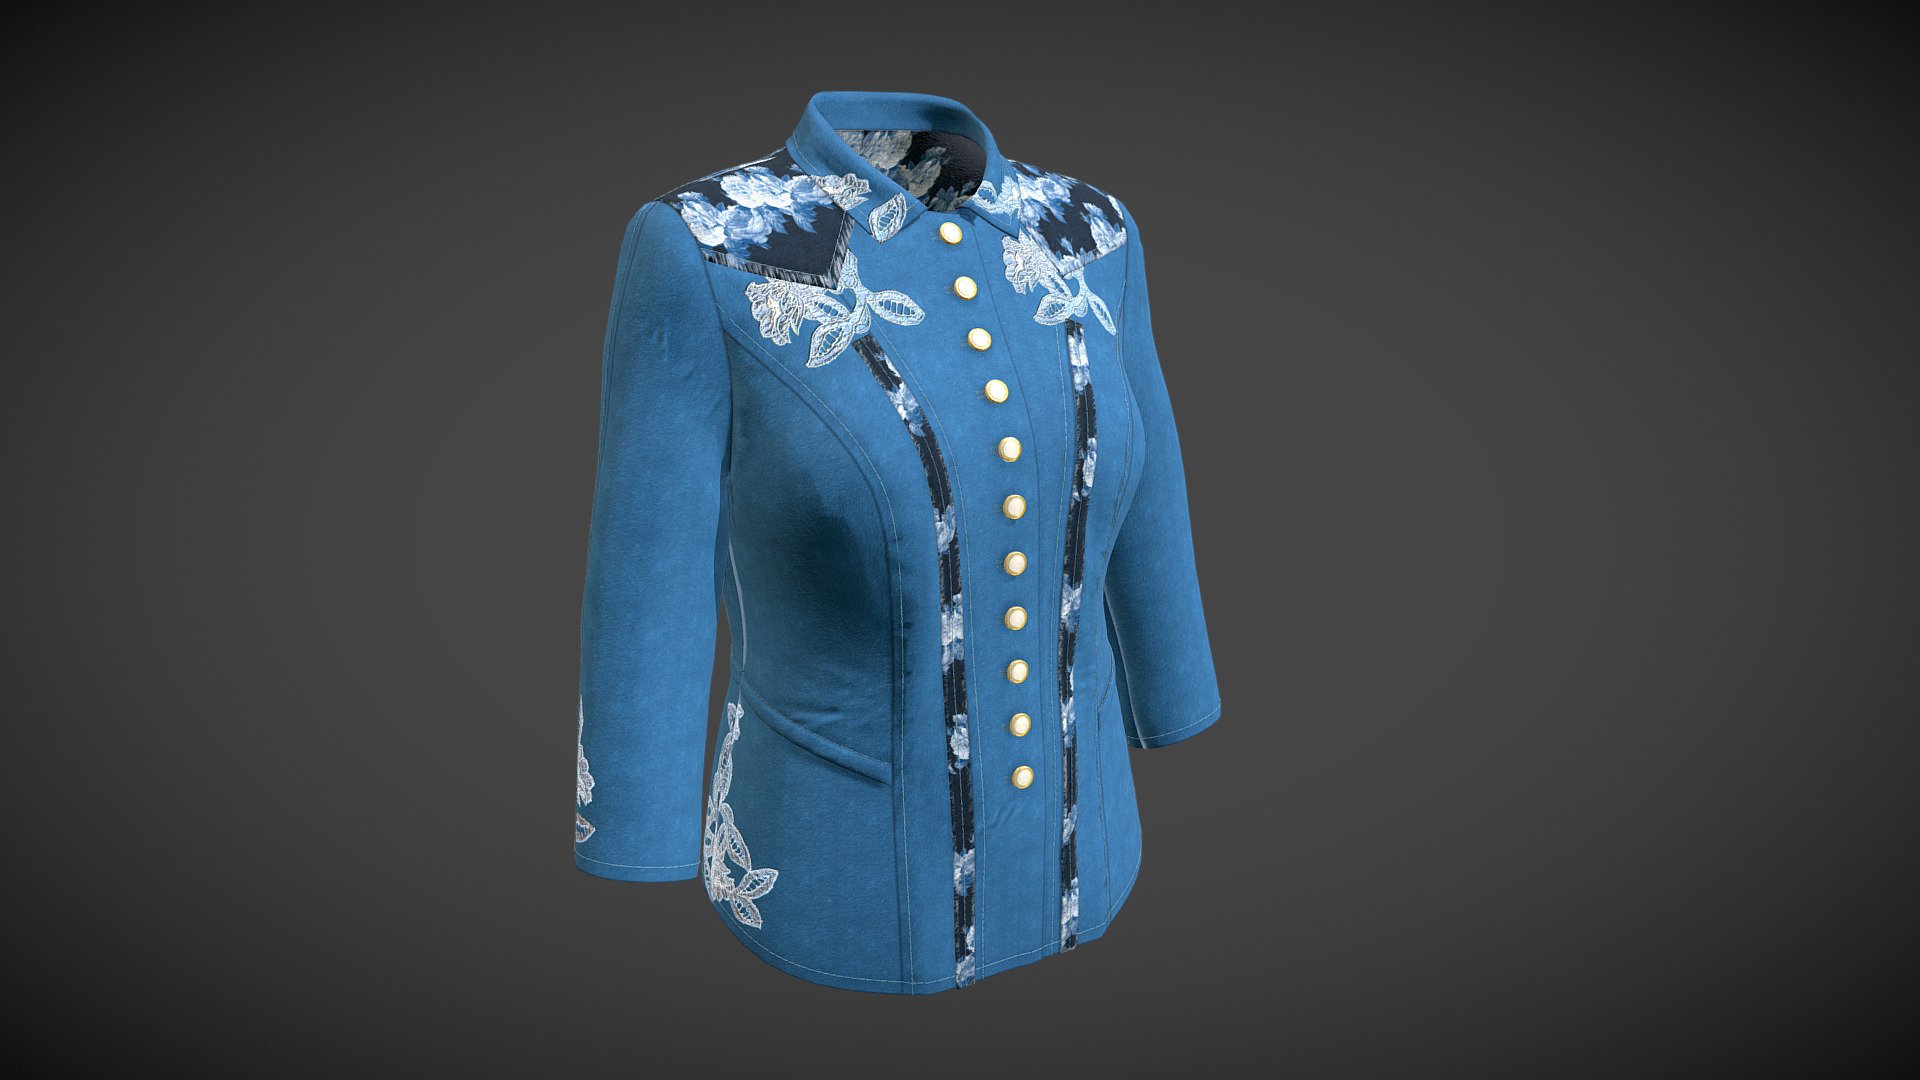 The 3D model presents a 3D reconstruction of a denim shirt (Design patent RU114143). The shirt consists of the front, back, collar and sleeves. The garment is decorated with lace. The shirt fastens with eleven buttons and buttonholes. The 3D model was created in Clo3D software, textured in Substance Painter and post-processed in 3dsMax.

The authors of the 3D model are Mariia Moskvina and Aleksei Moskvin (Saint Petersburg State University of Industrial Technologies and Design)

https://independent.academia.edu/MariiaMoskvina

https://independent.academia.edu/AlekseiMoskvin

DOI: http://dx.doi.org/10.13140/RG.2.2.26613.45289

Original source: https://new.fips.ru/registers-doc-view/fips_servlet?DB=RUDE&amp;DocNumber=114143&amp;TypeFile=html - Shirt (Design patent RU114143) - 3D model by Mariia Moskvina (@mariia89) 3d model